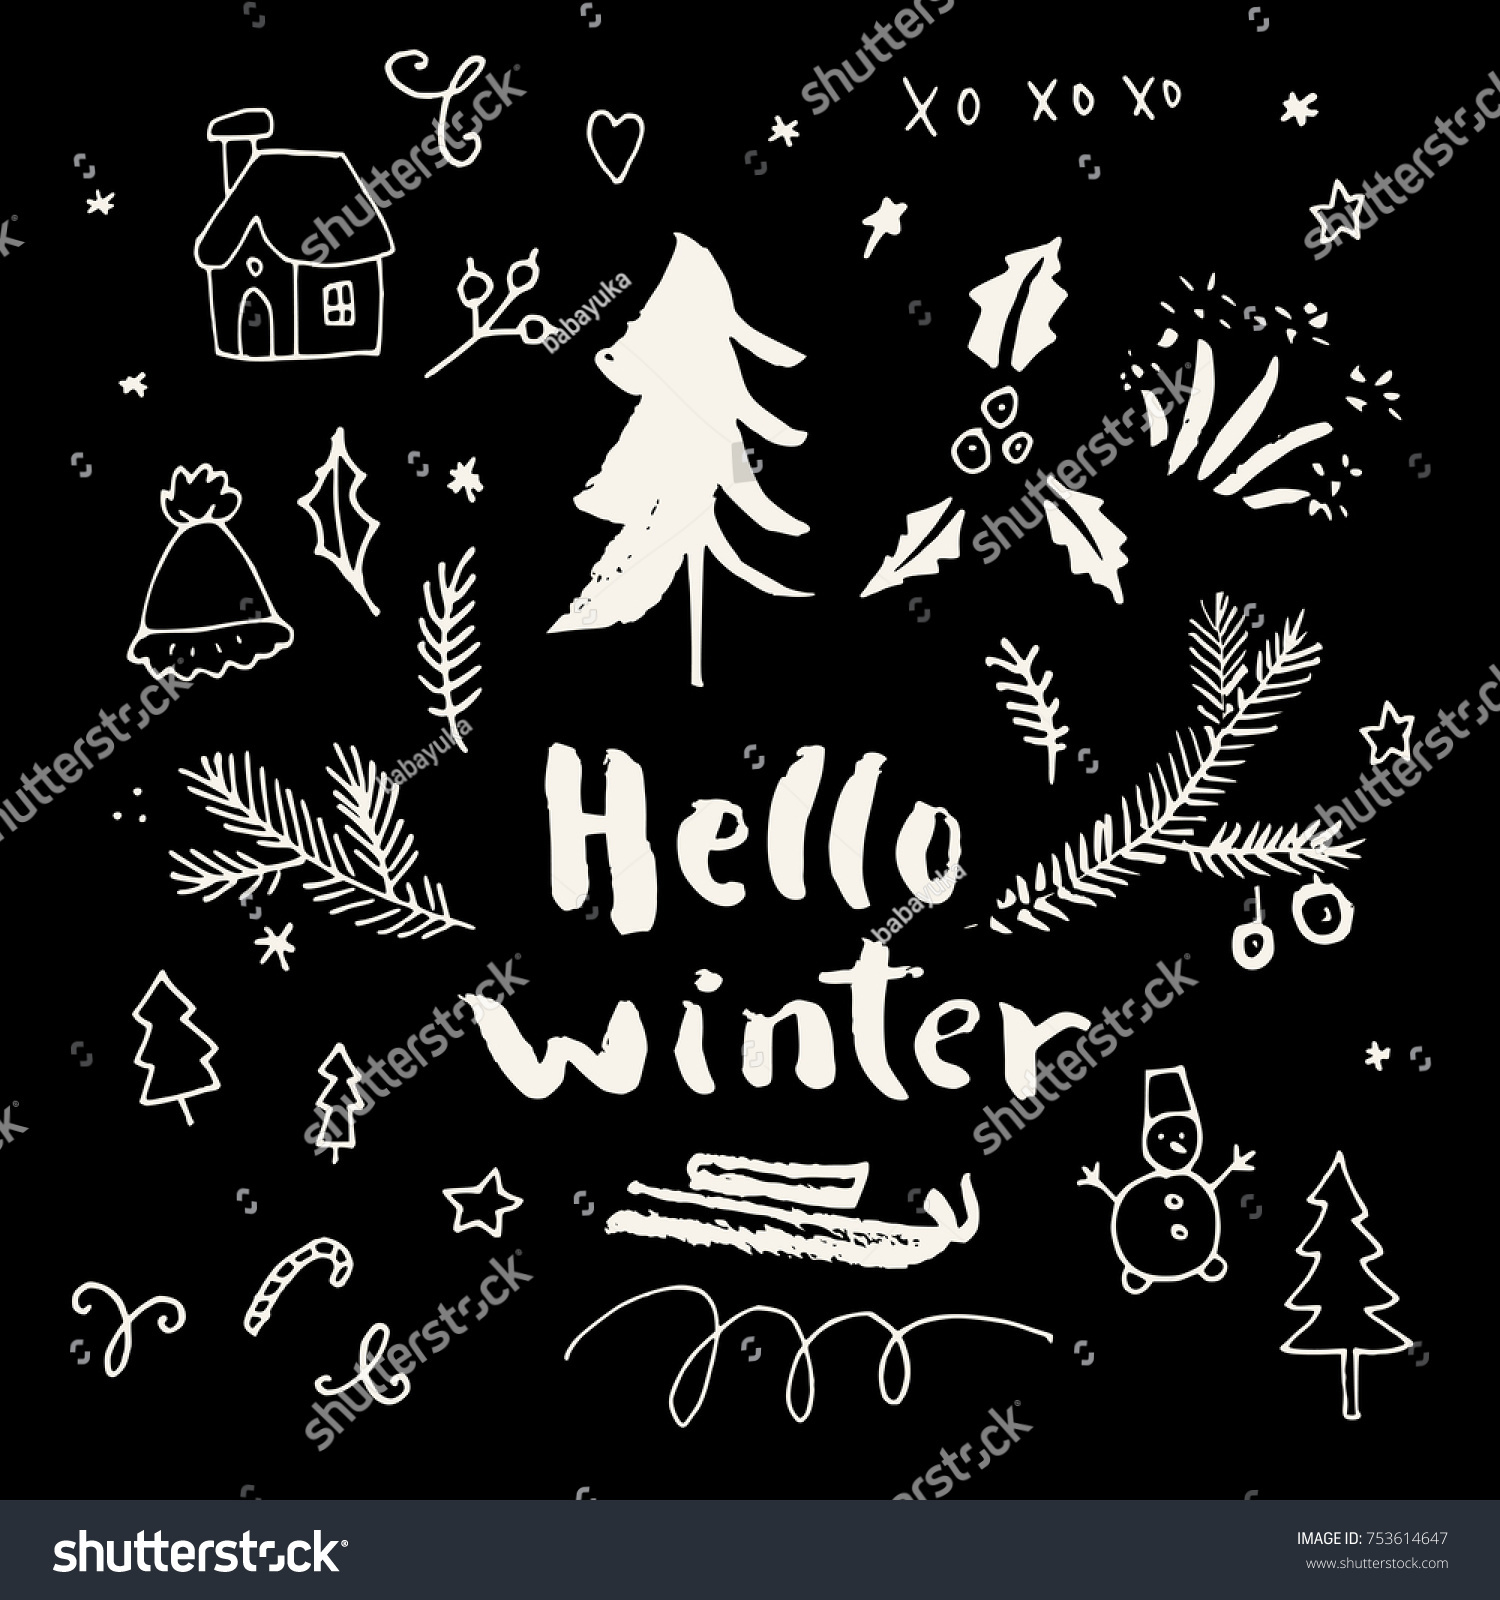 Merry Christmas and Holiday Season calligraphic hand drawn greeting card in black and